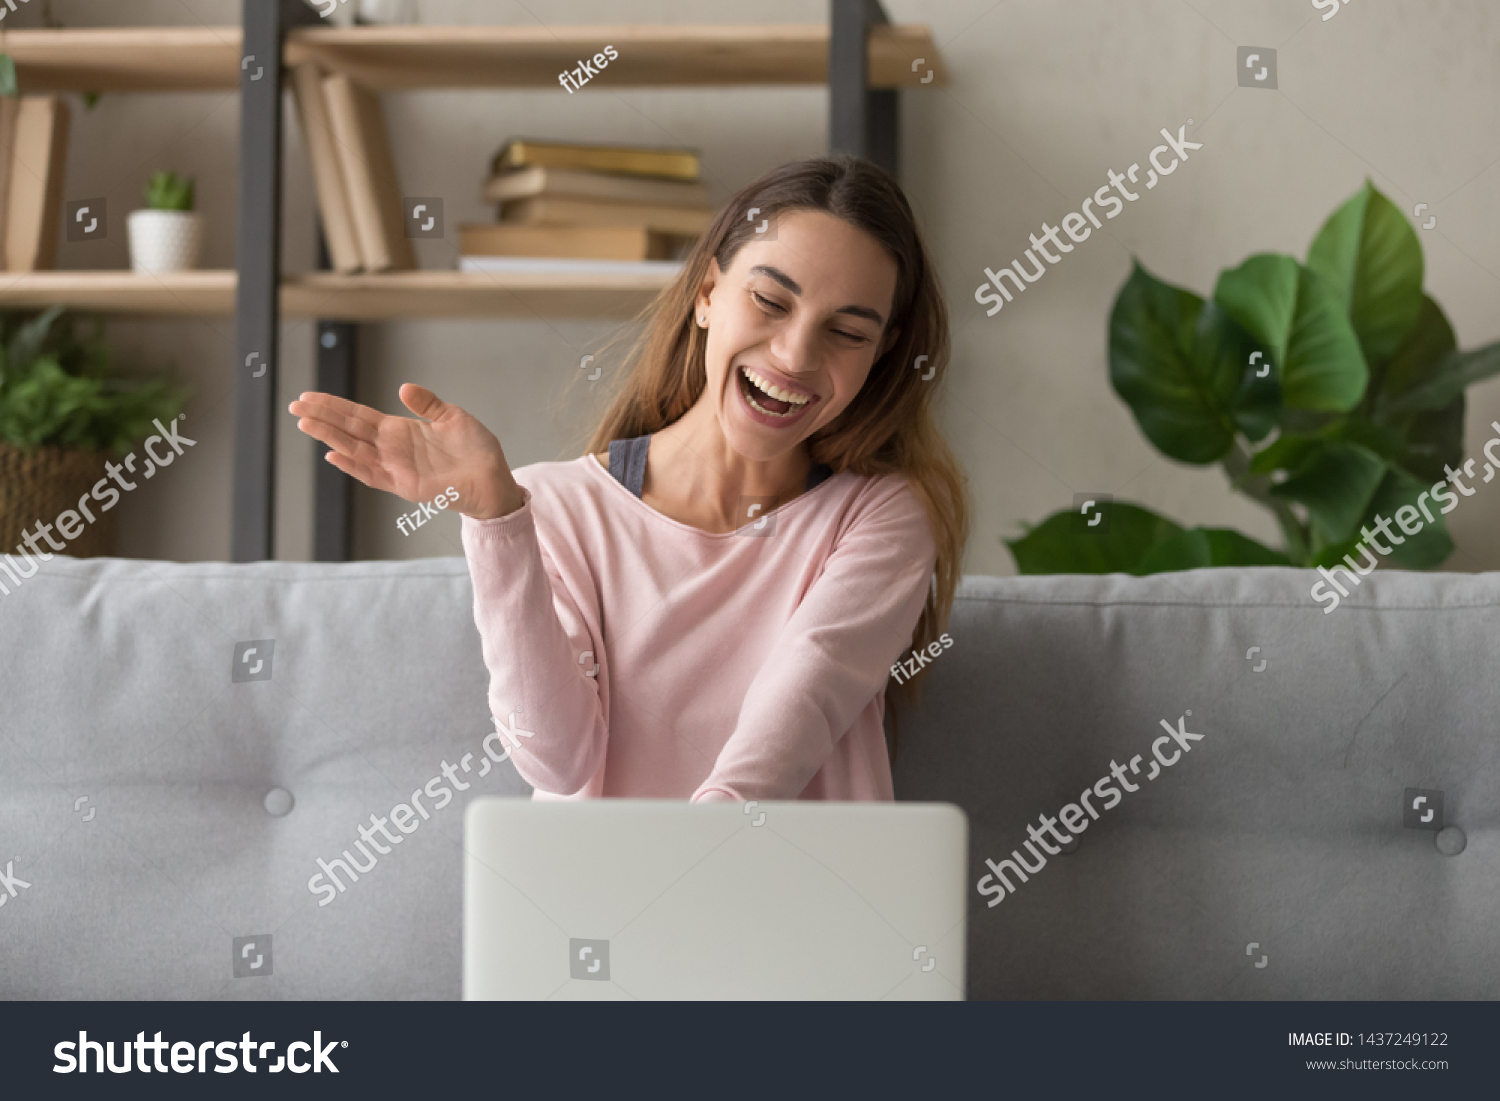 Smiling girl sit on couch at home wave talk with friend or family having video call on laptop, happy young woman greeting say hello, speak communicate using dating online application on computer #1437249122